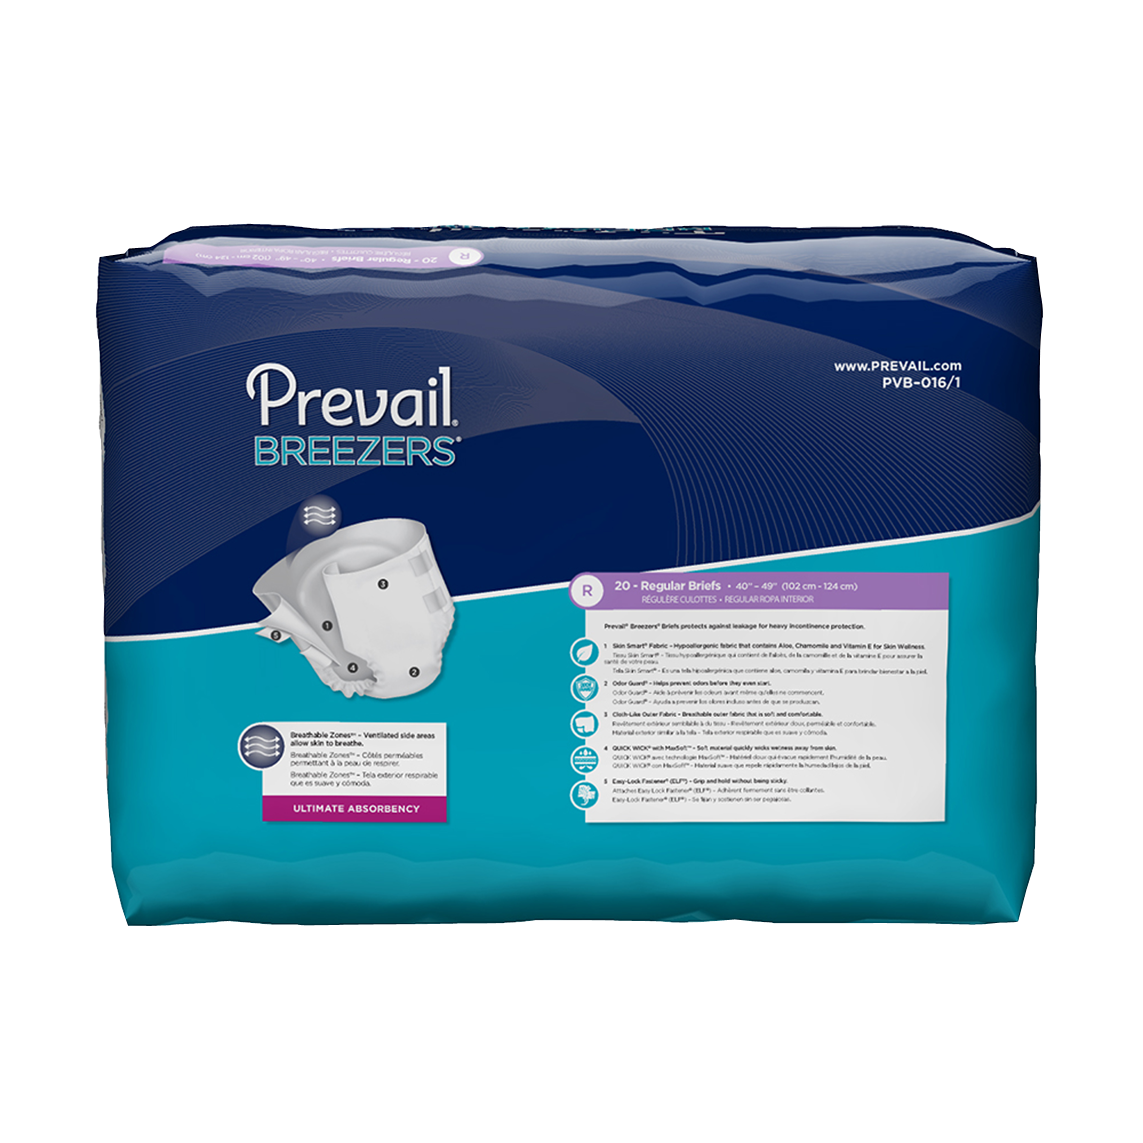 Adult diapers for heavy urinary incontinence | Prevail Breezers Absorbency Adult Briefs MyLiberty.Life